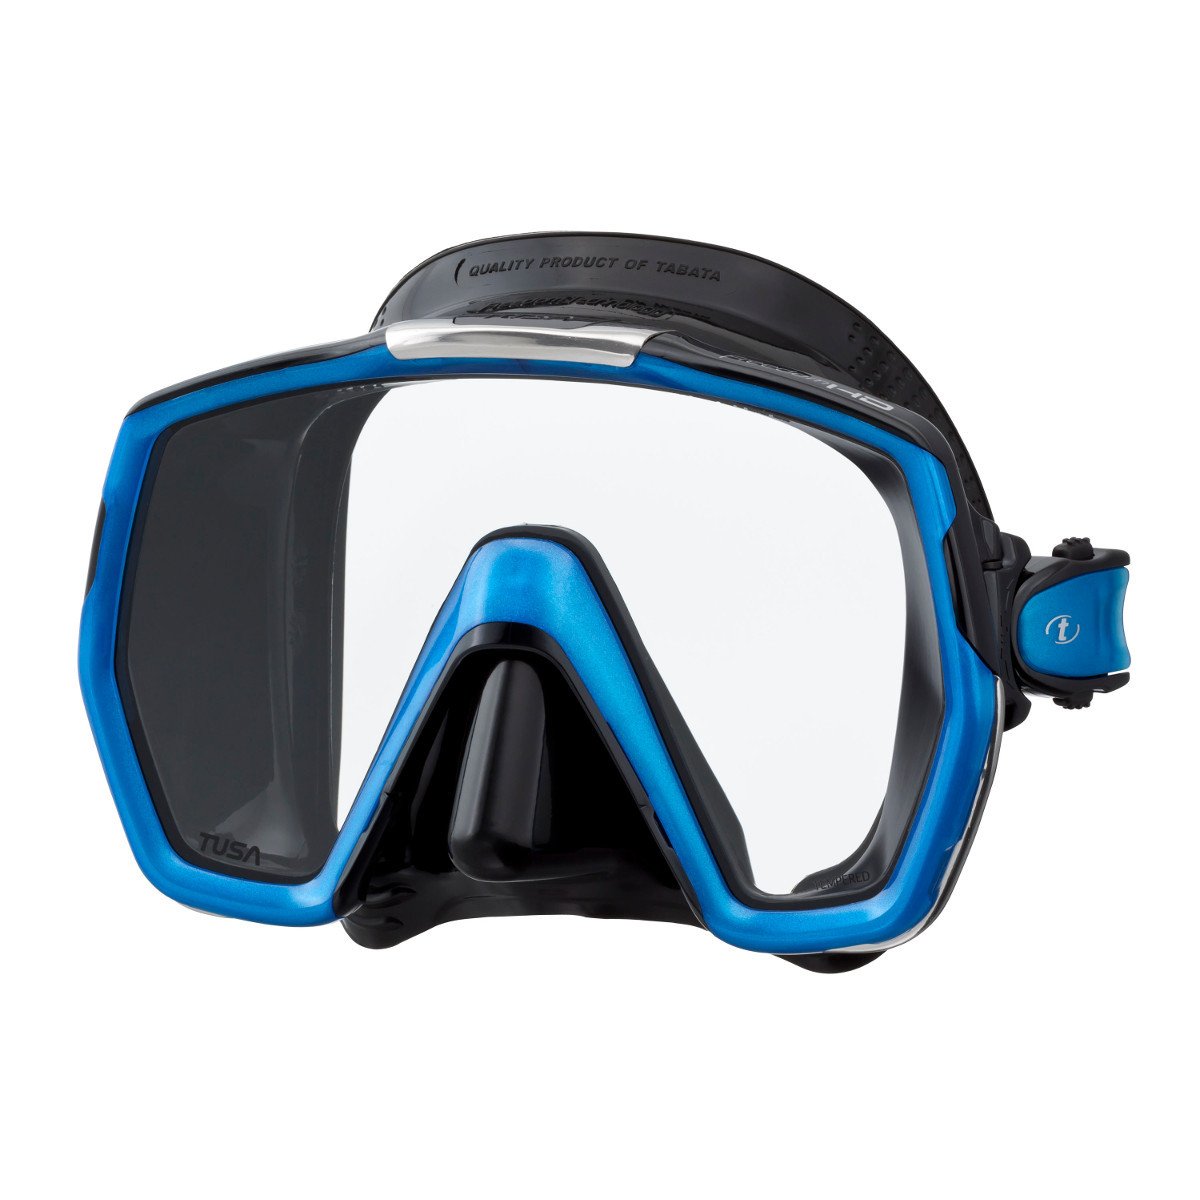 TUSA Freedom HD Mask - Oyster Diving Equipment